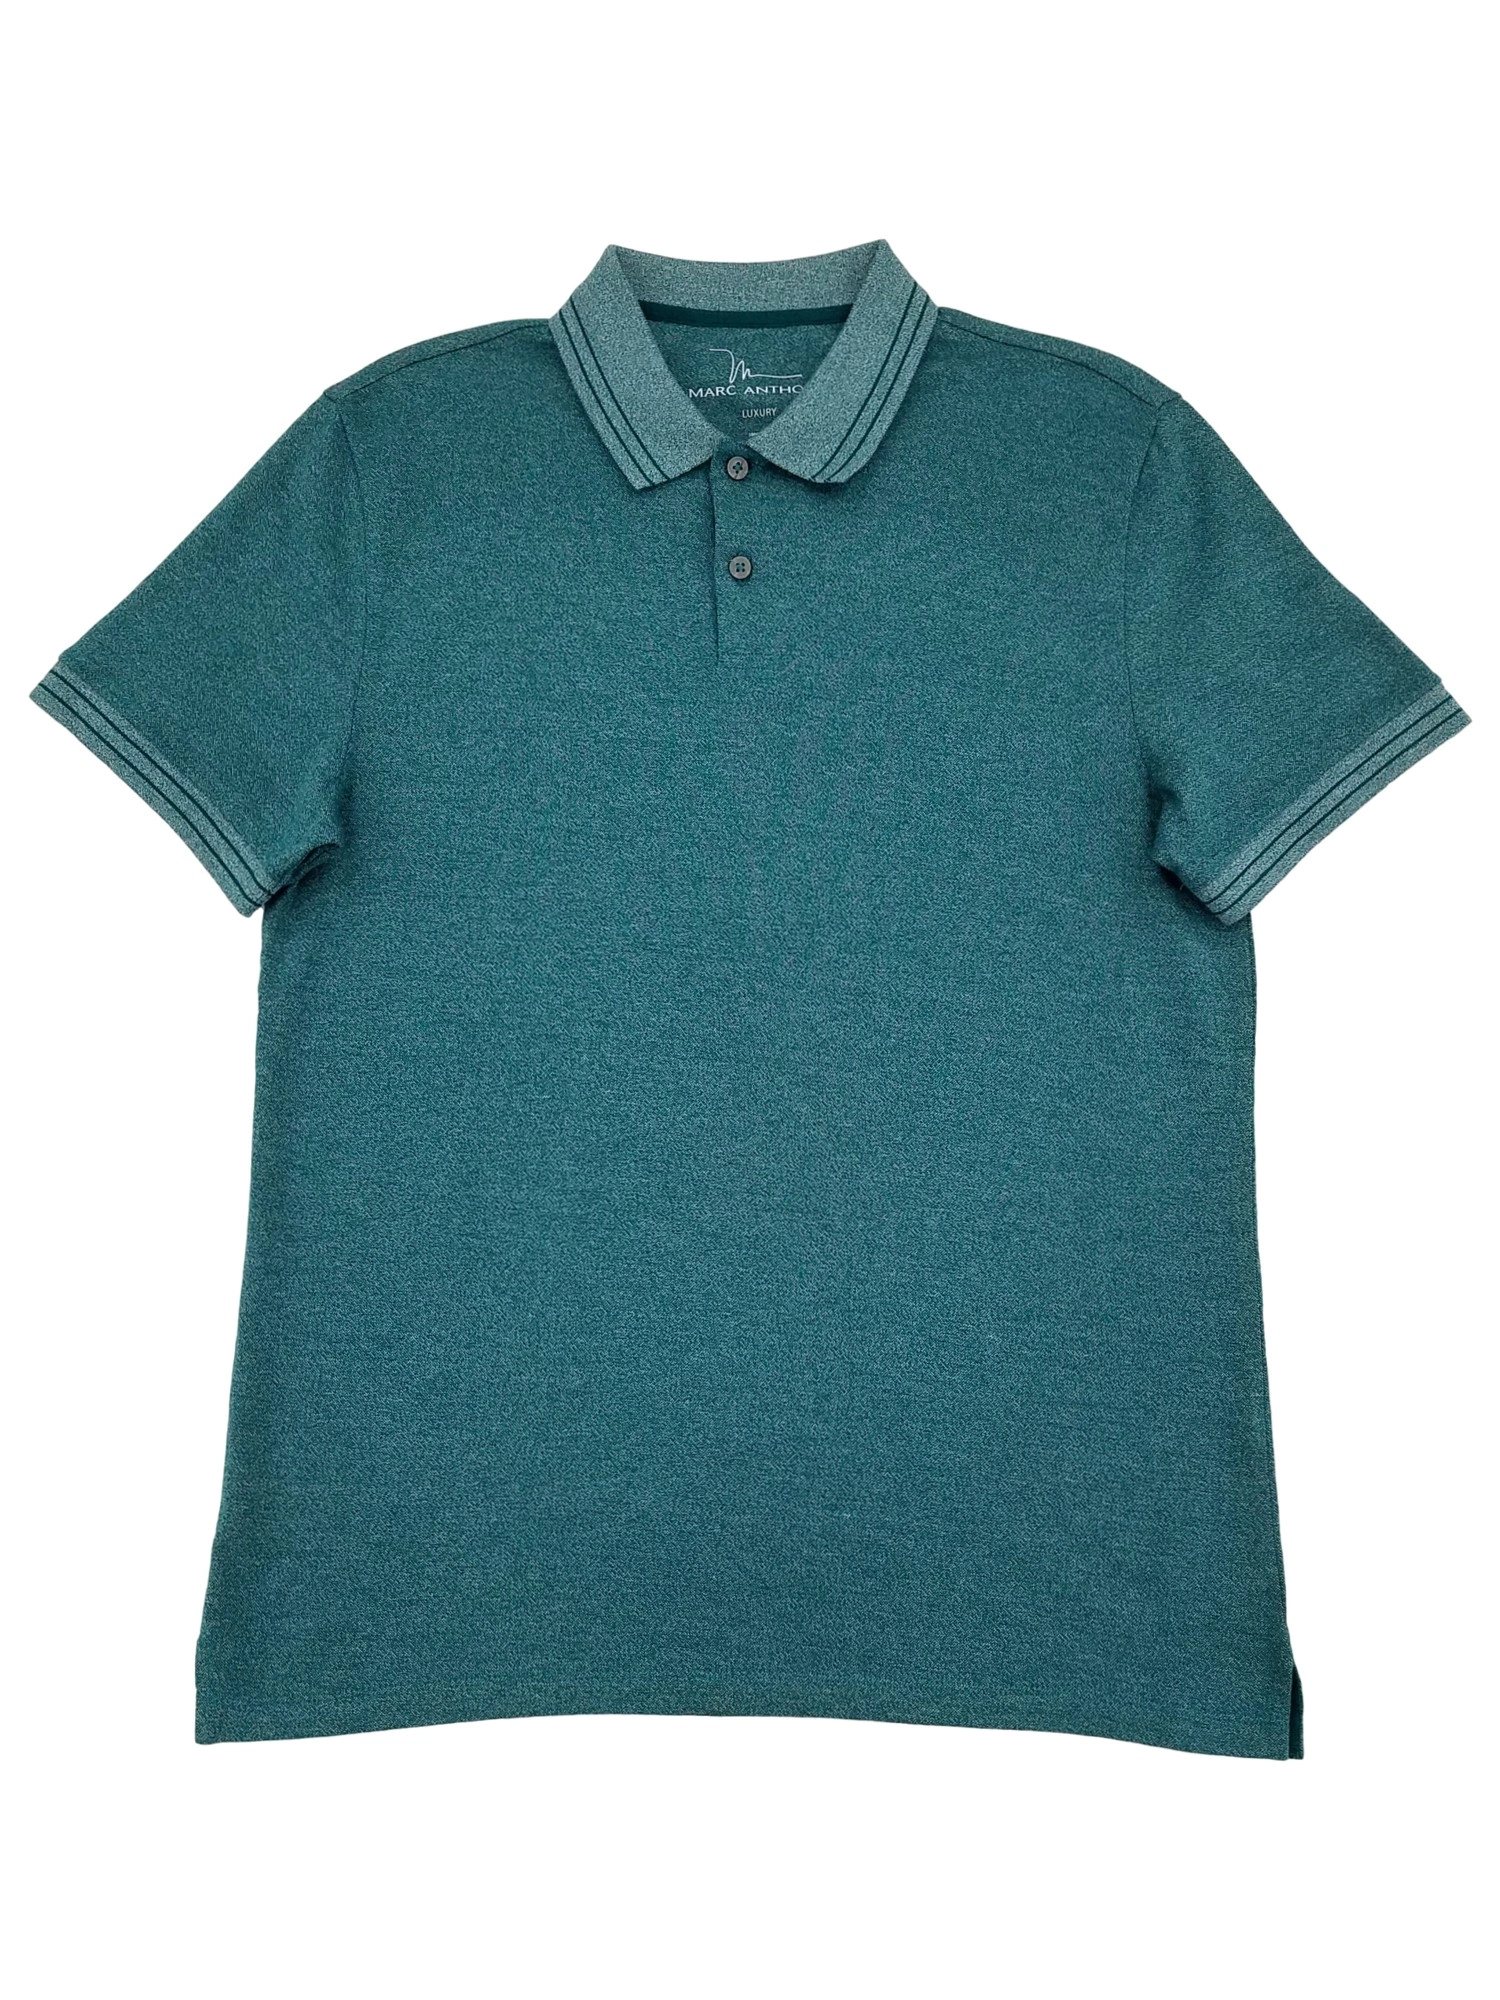 Regular Fit Double Tipped Polo Shirt Made in Bangladesh